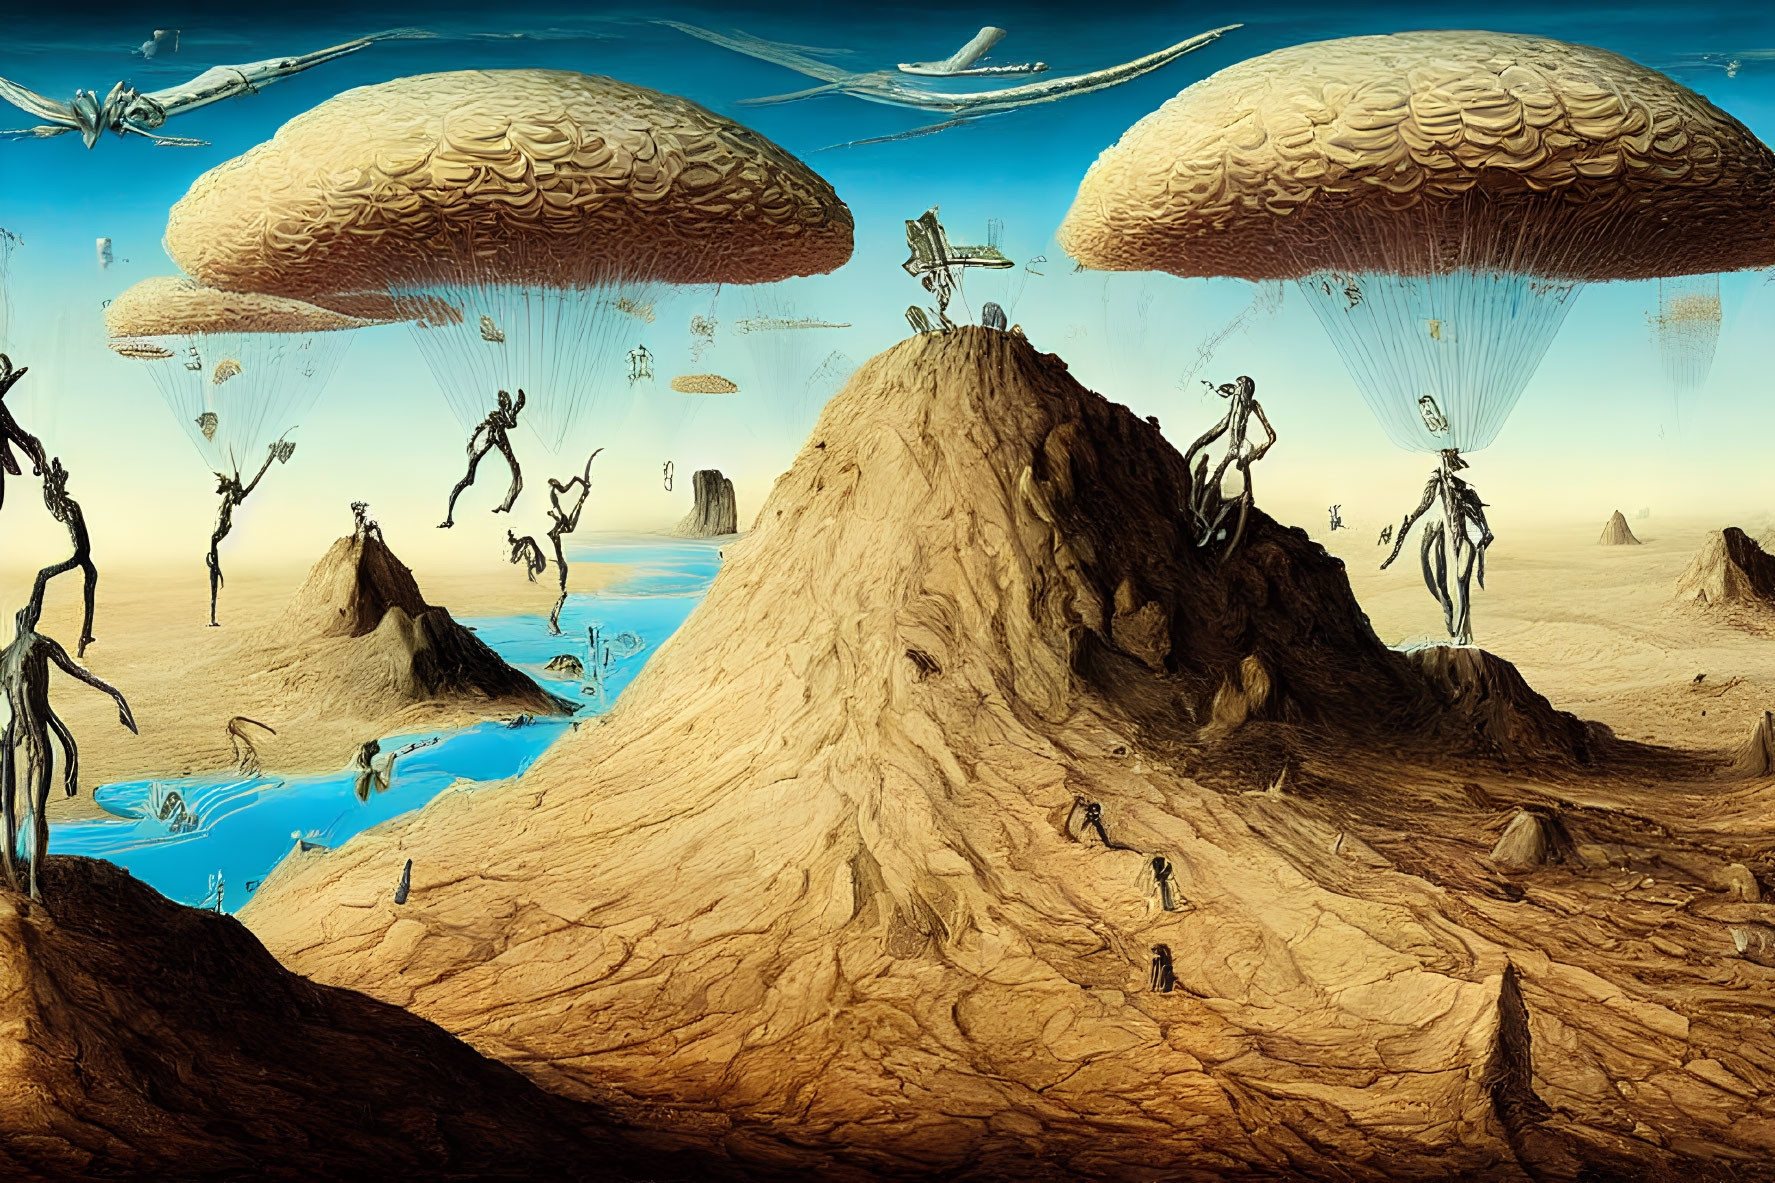 Surreal humanoid figures parachuting from mushroom clouds in a vibrant landscape